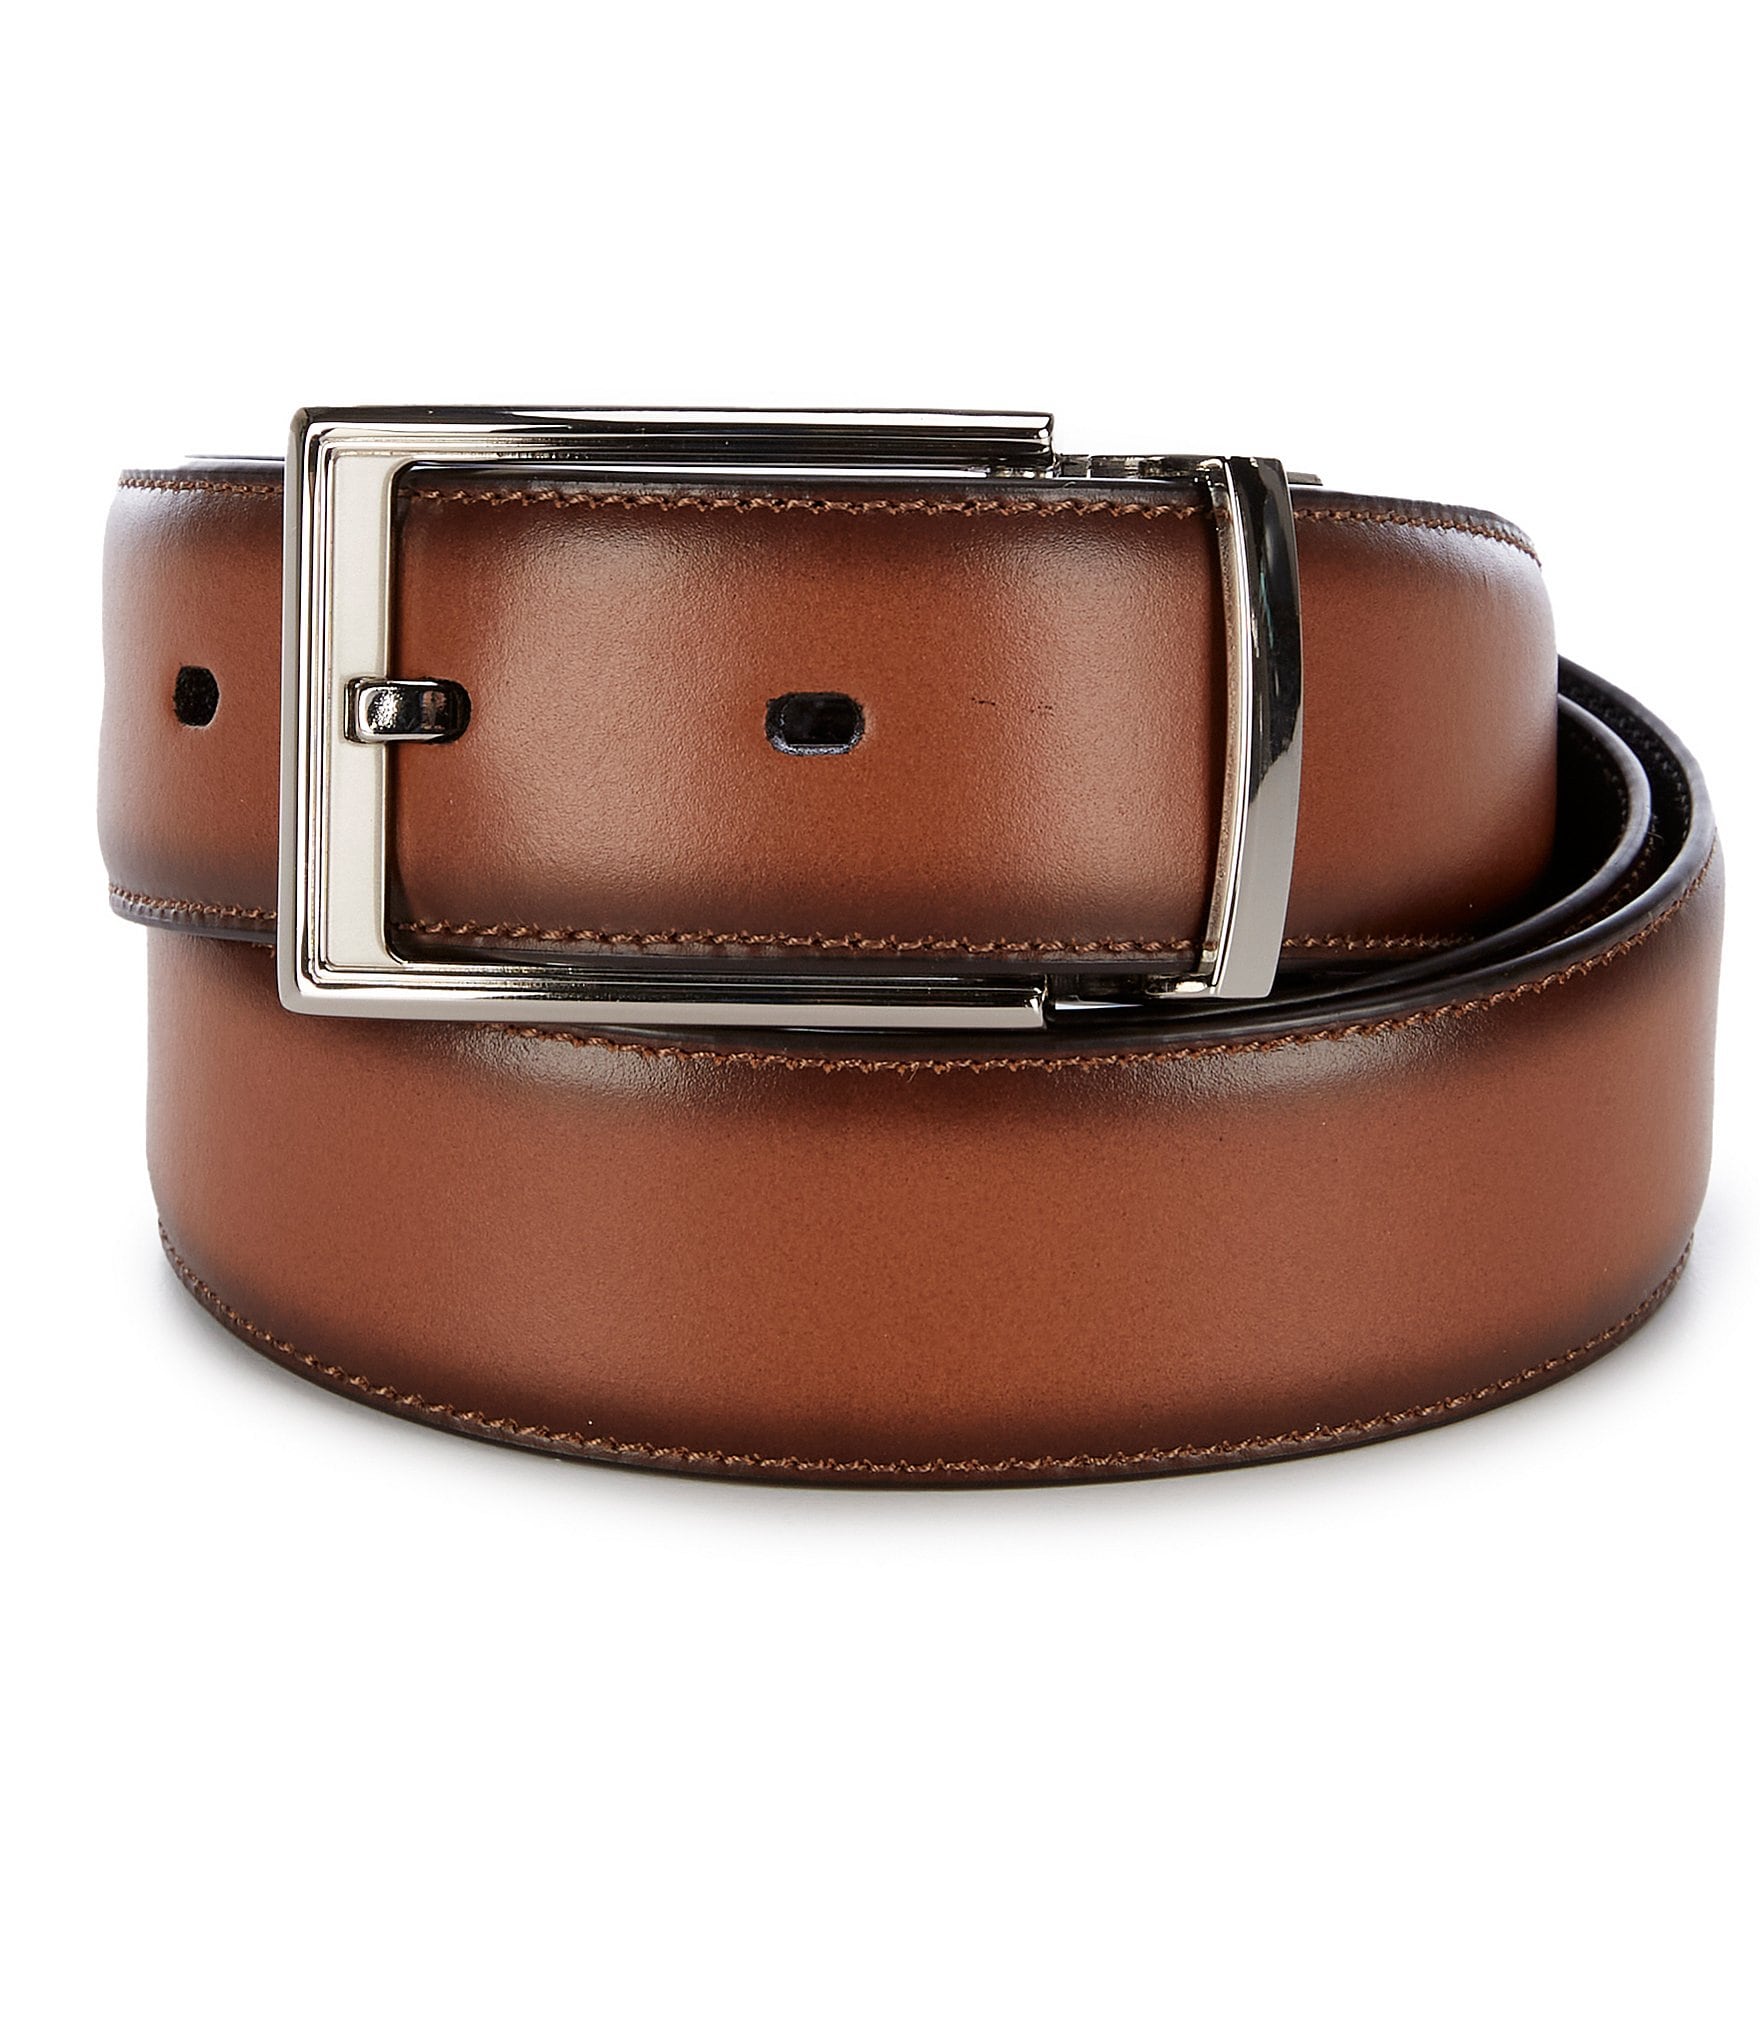 Roundtree & Yorke Men's Brown V-Braided Leather Belt, 42